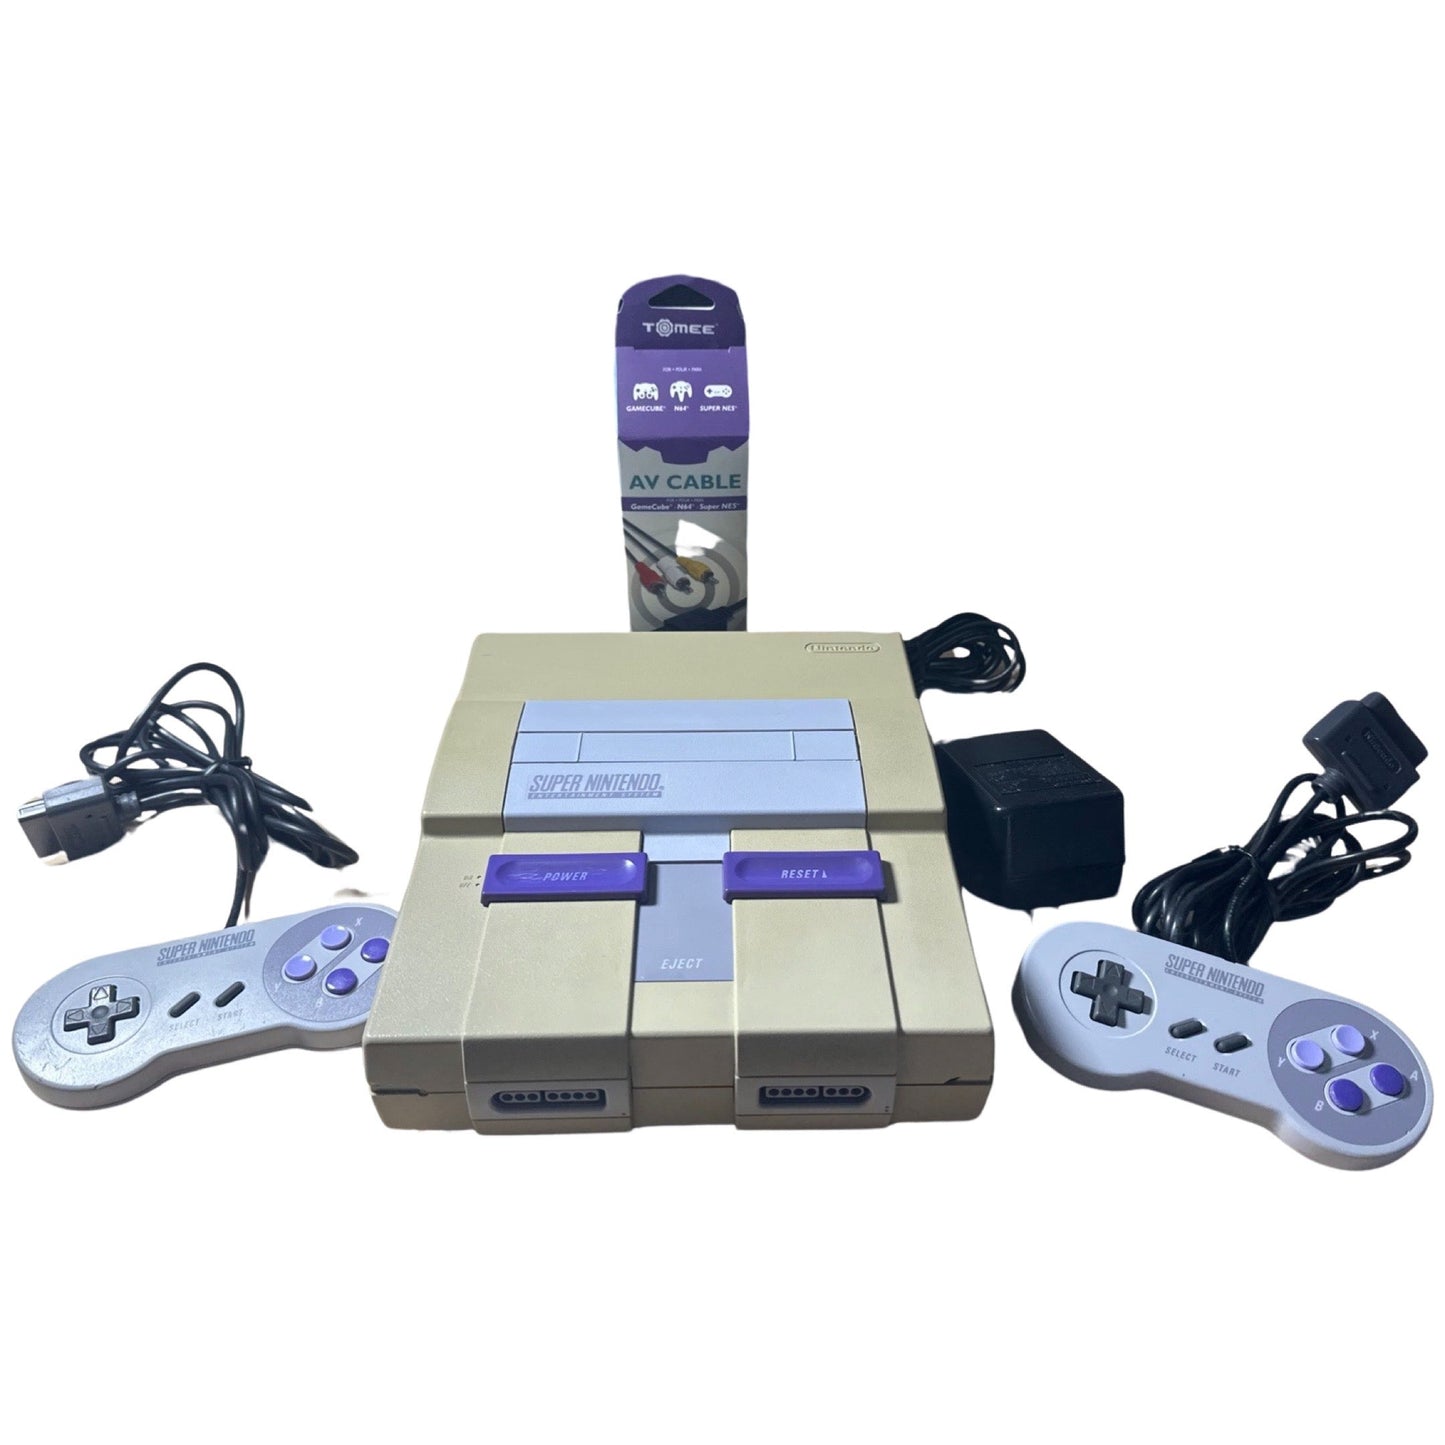 Super Nintendo (With 2 Controllers)